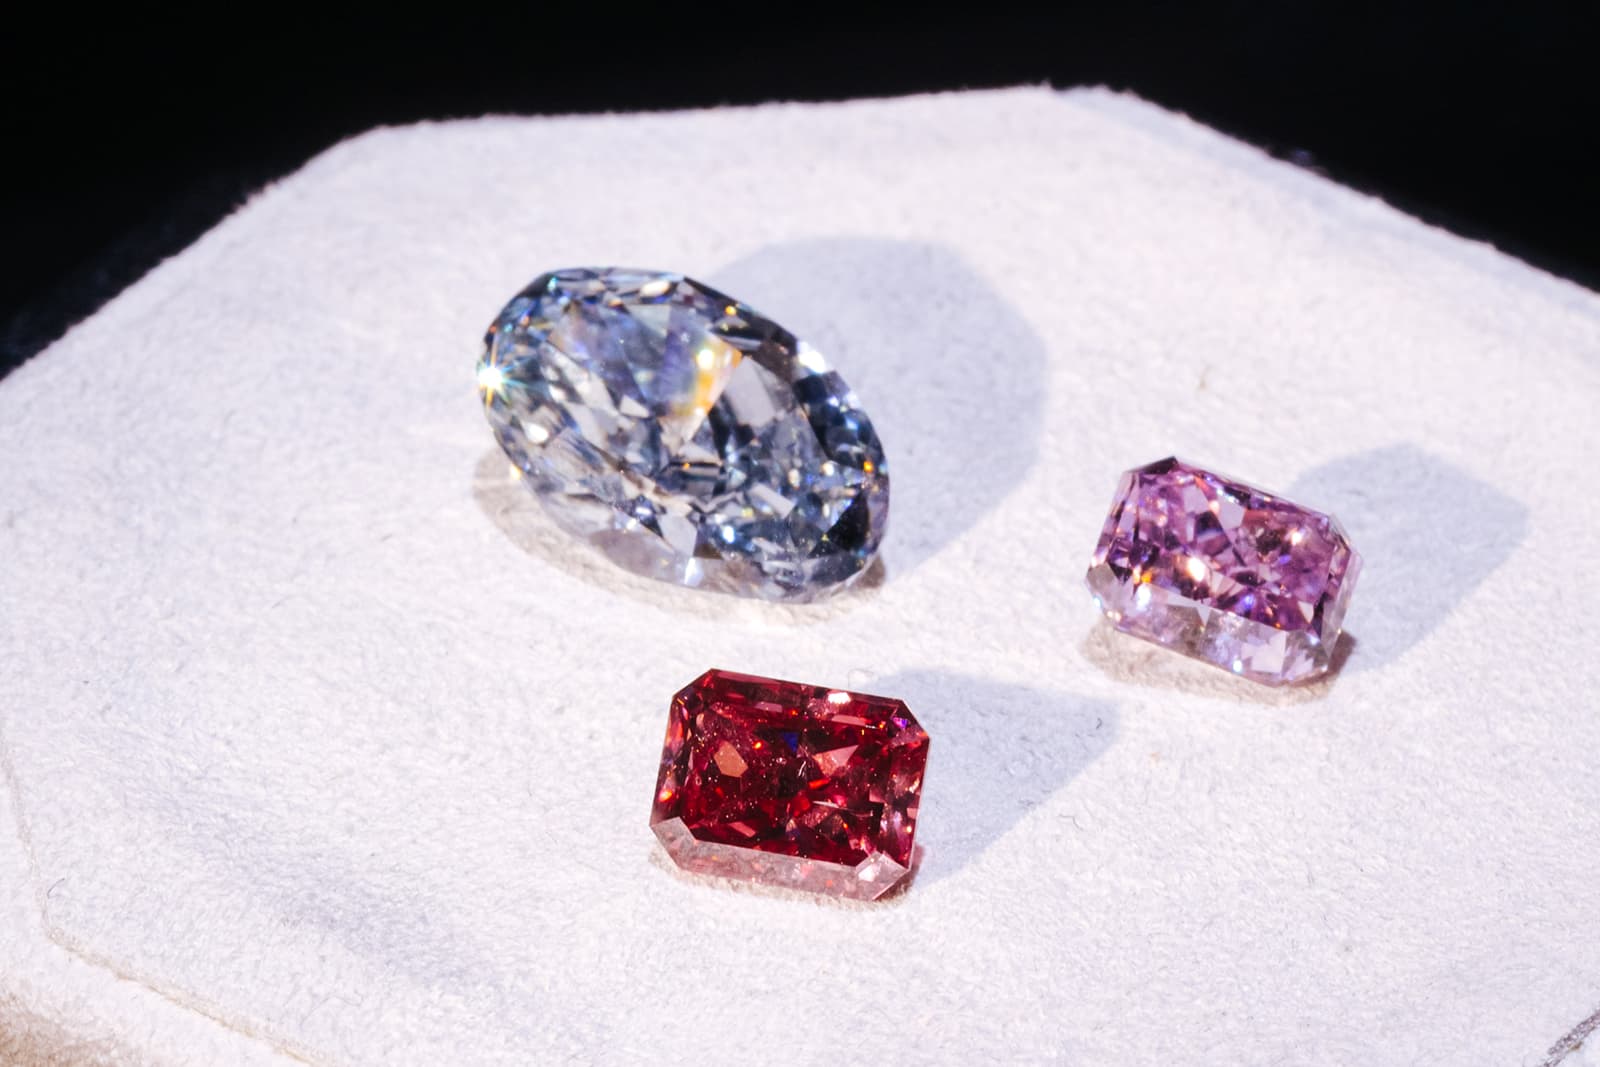 A selection of Tiffany & Co.'s loose diamonds and gemstones on display at the Dubai Expo 2020 